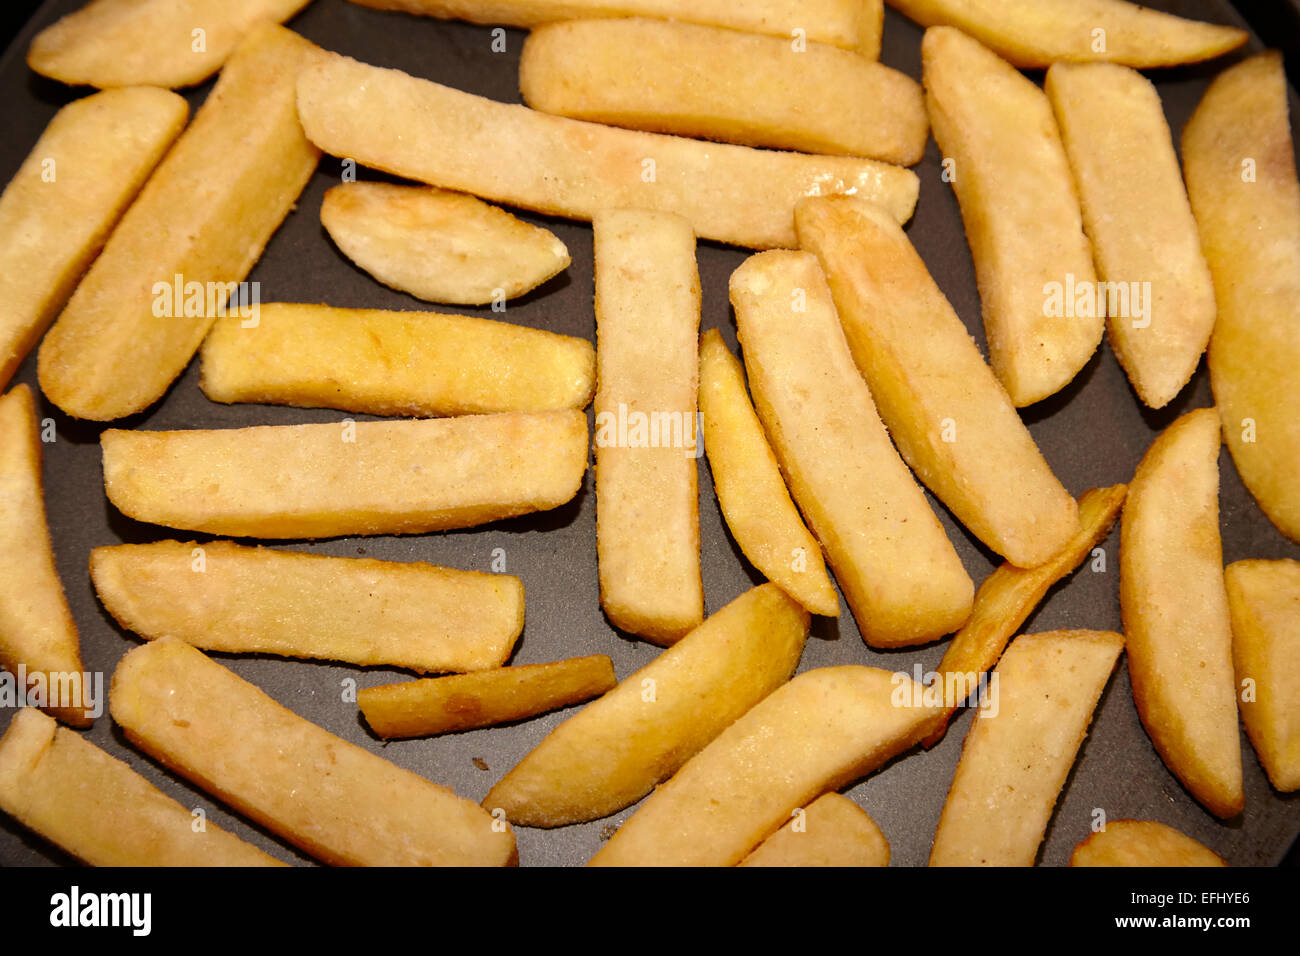 frozen oven chips laid out on a baking tray Stock Photo